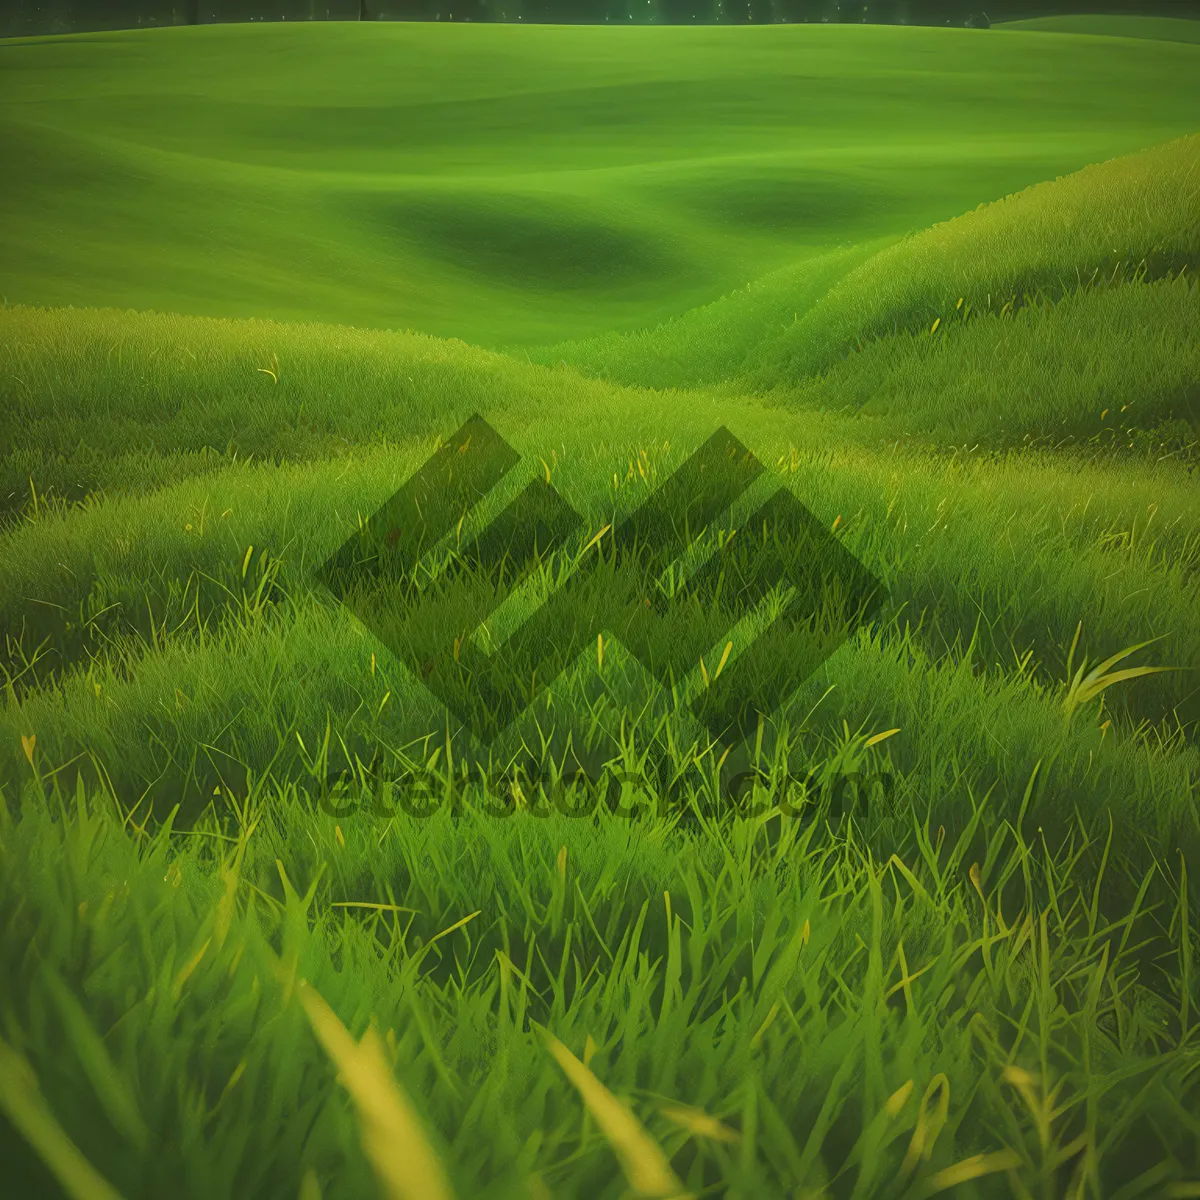 Picture of Vibrant Green Landscape: Fresh, Lush Meadow